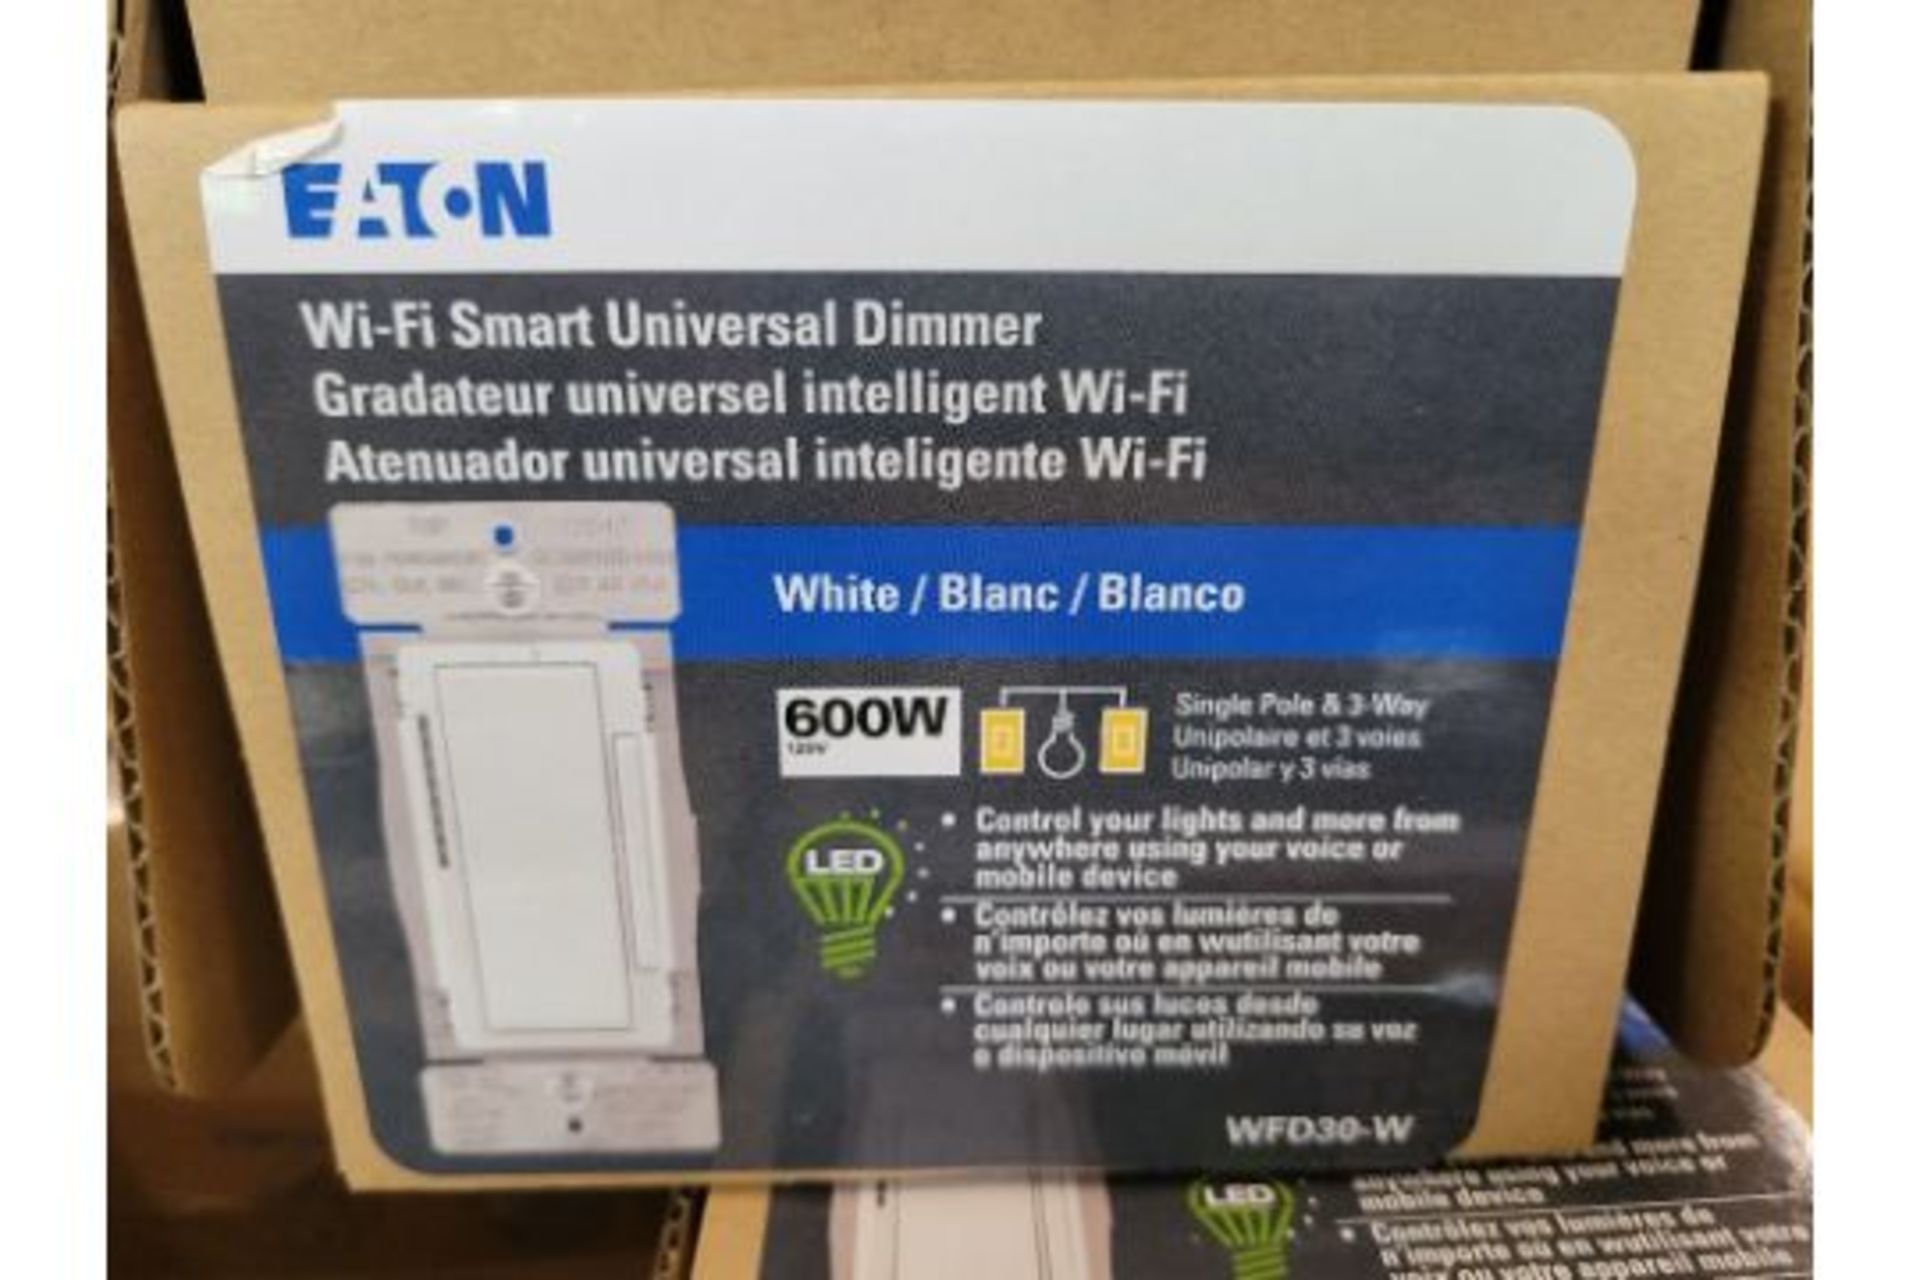 36x Eaton WFD30-W-SP-L Light and Dimmer Switches WiFi Smart Switch 125V 60Hz White - Image 2 of 4